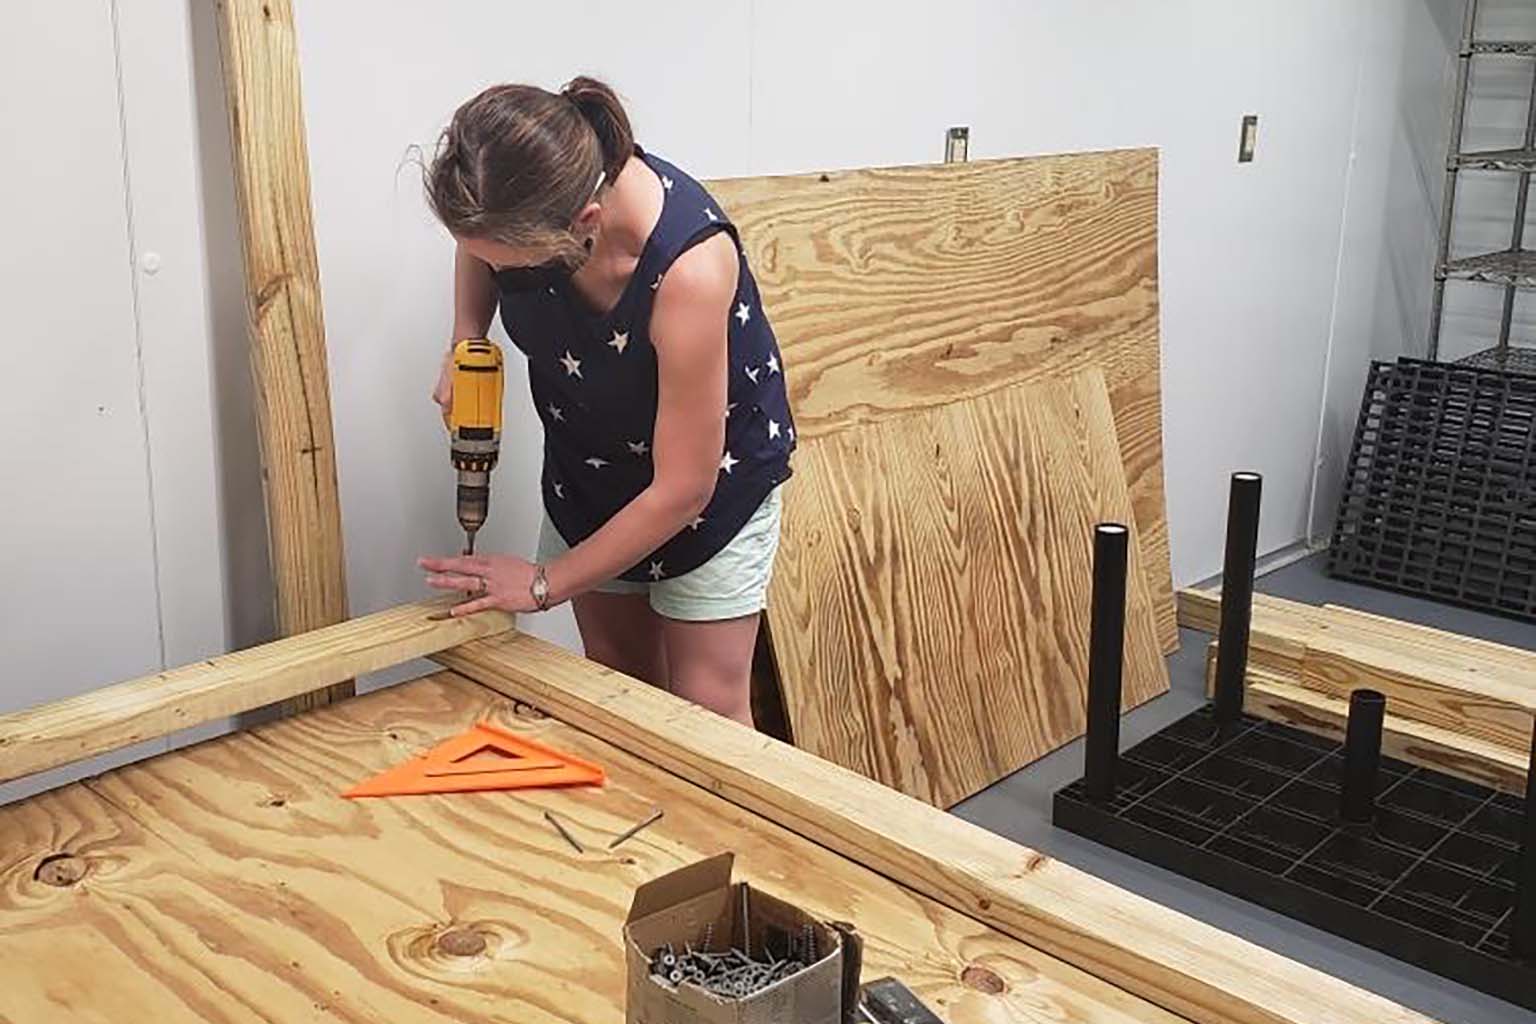 Julia van Kessel, a woman, uses an electric drill to secure the ends of two boards coming together at a right angle as she builds large plywood shelves.